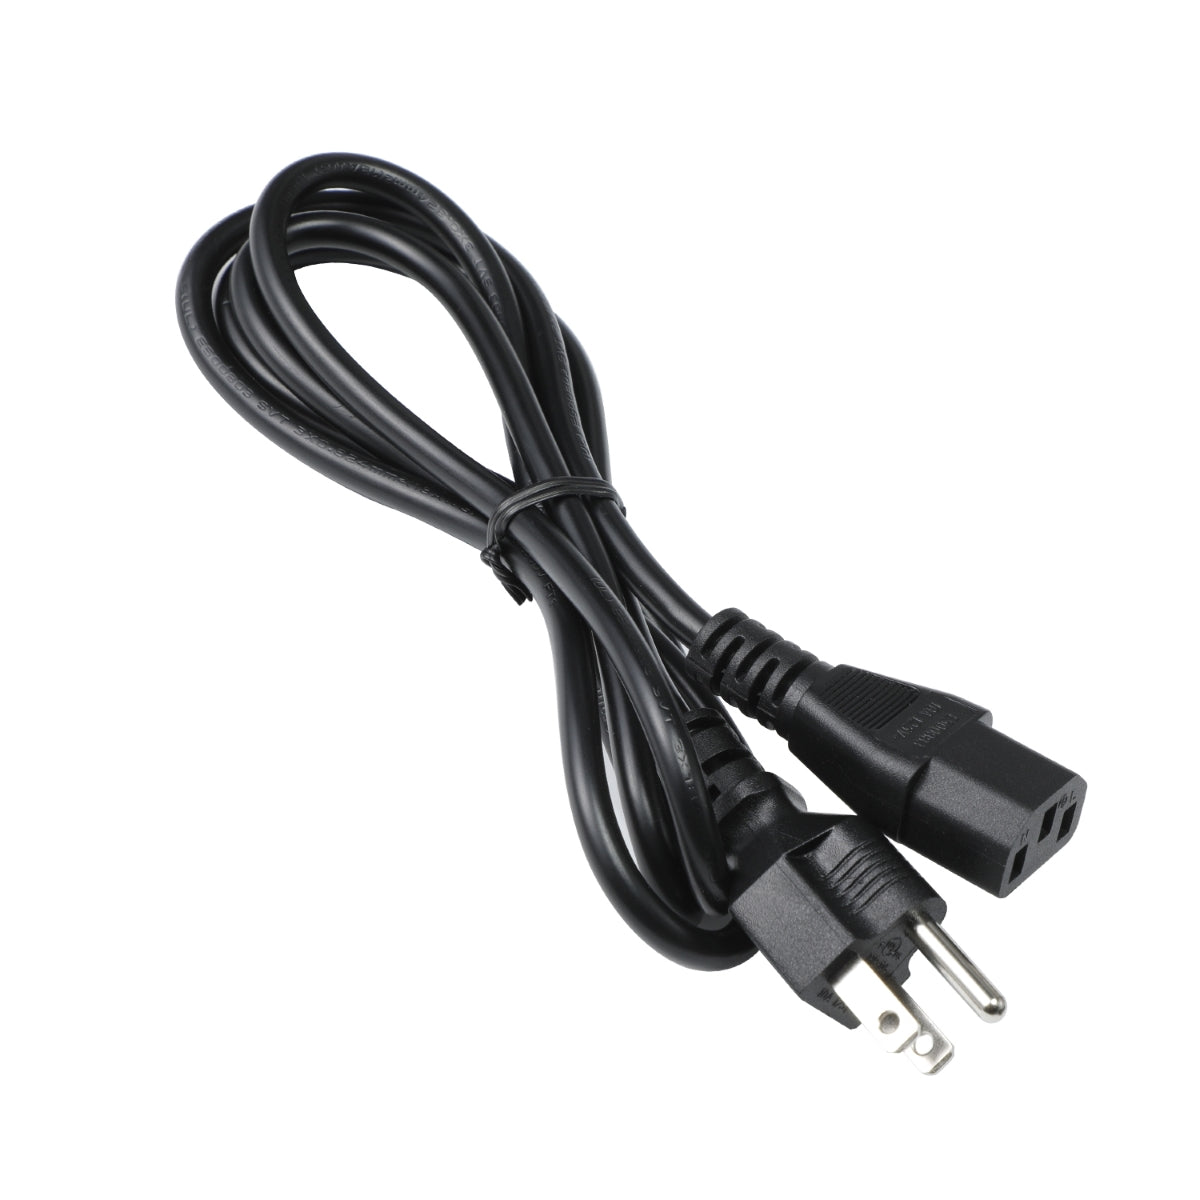 Power Cord for Acer XF243Y Monitor